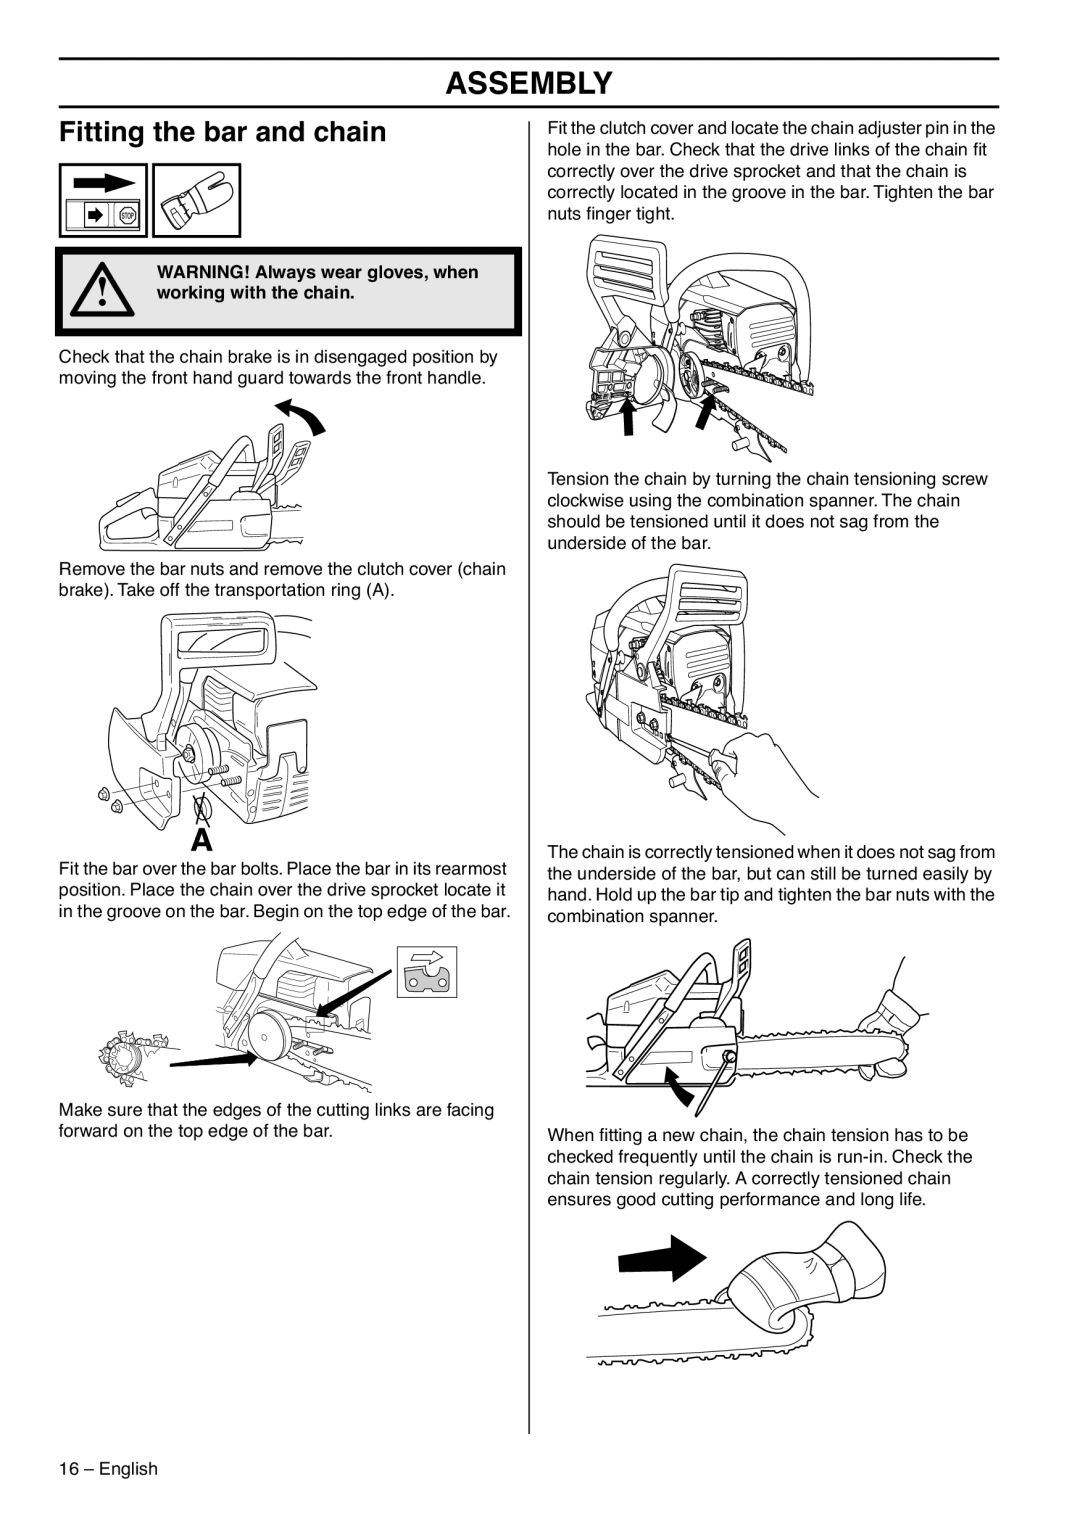 Husqvarna 1153183-26 manual Assembly, Fitting the bar and chain, WARNING! Always wear gloves, when, working with the chain 